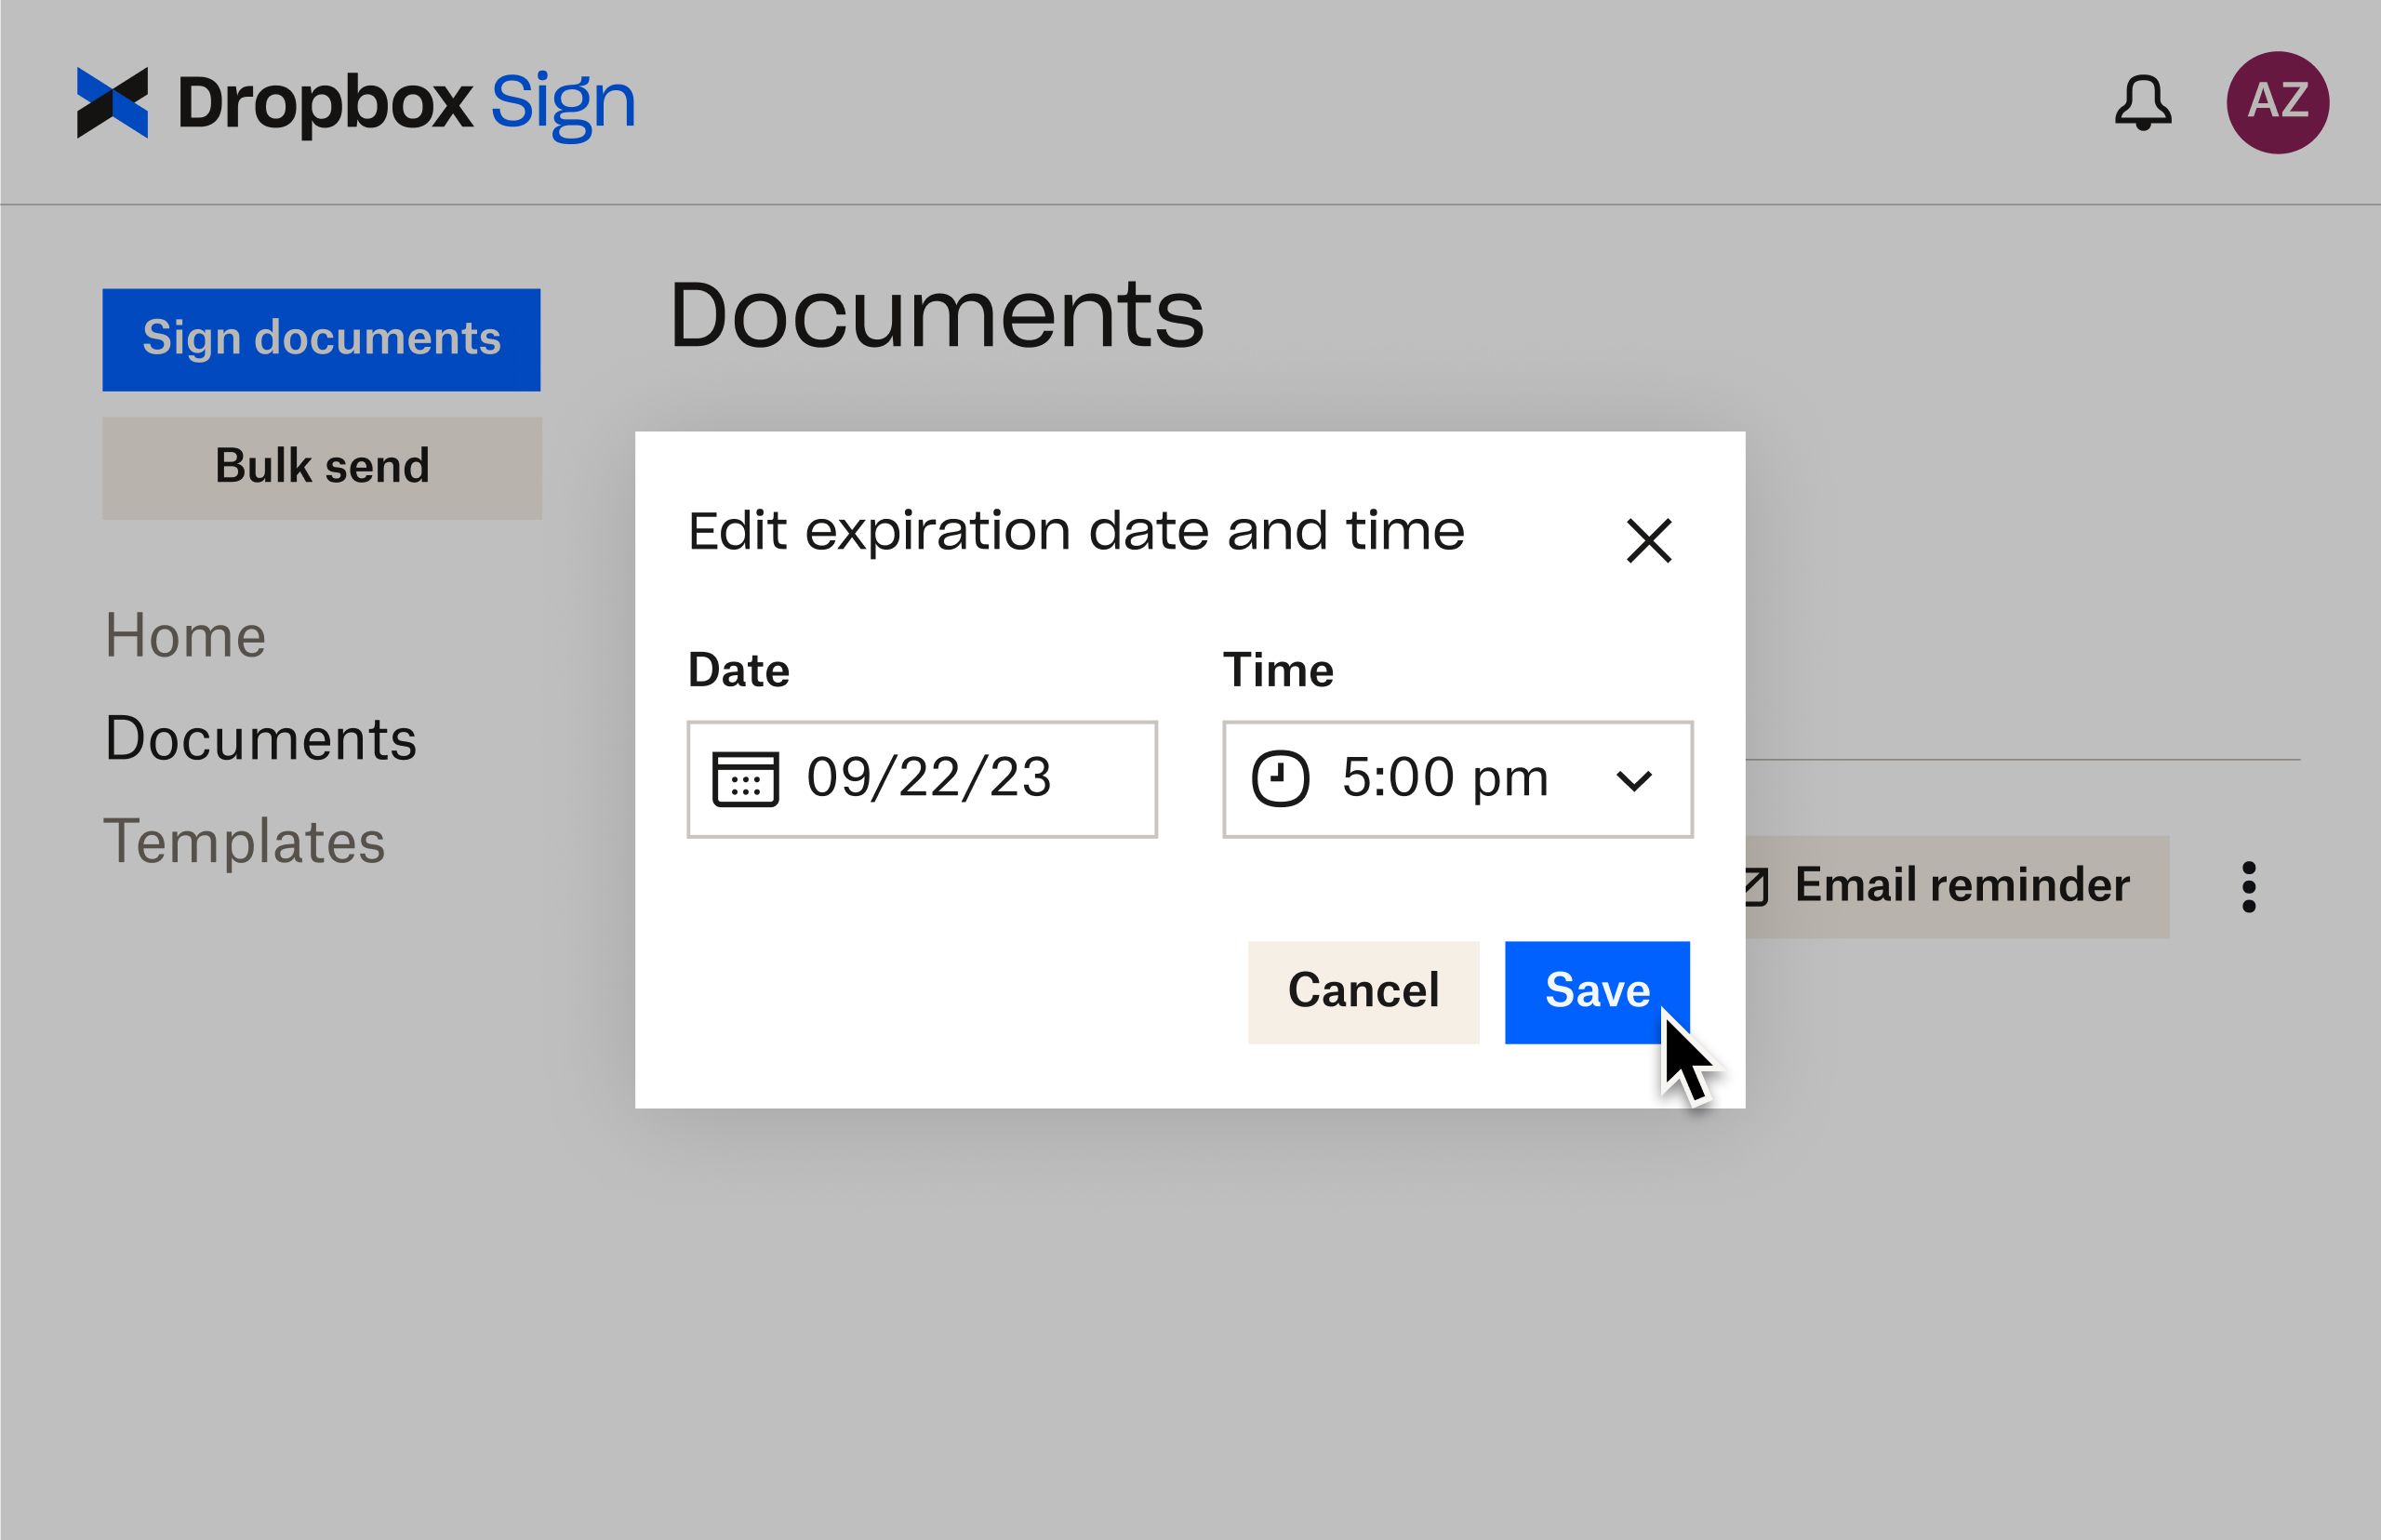 Dropbox Sign UI shows how to edit expiration dates after sending a document for signature